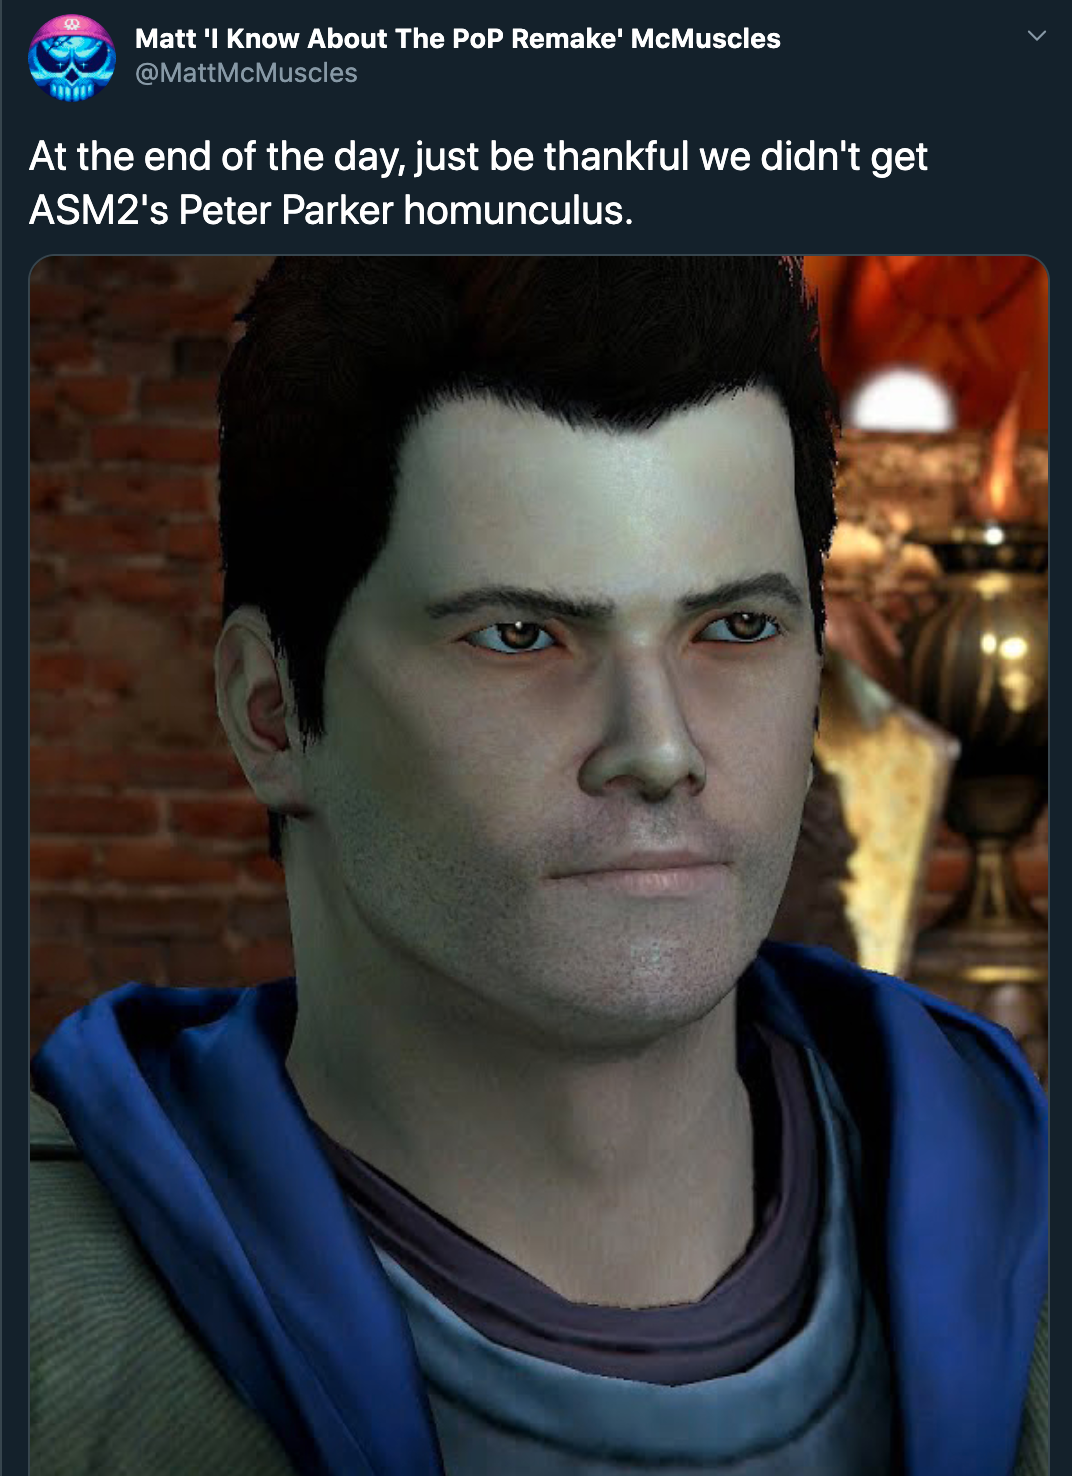 At the end of the day, just be thankful we didn't get ASM2's Peter Parker homunculus.